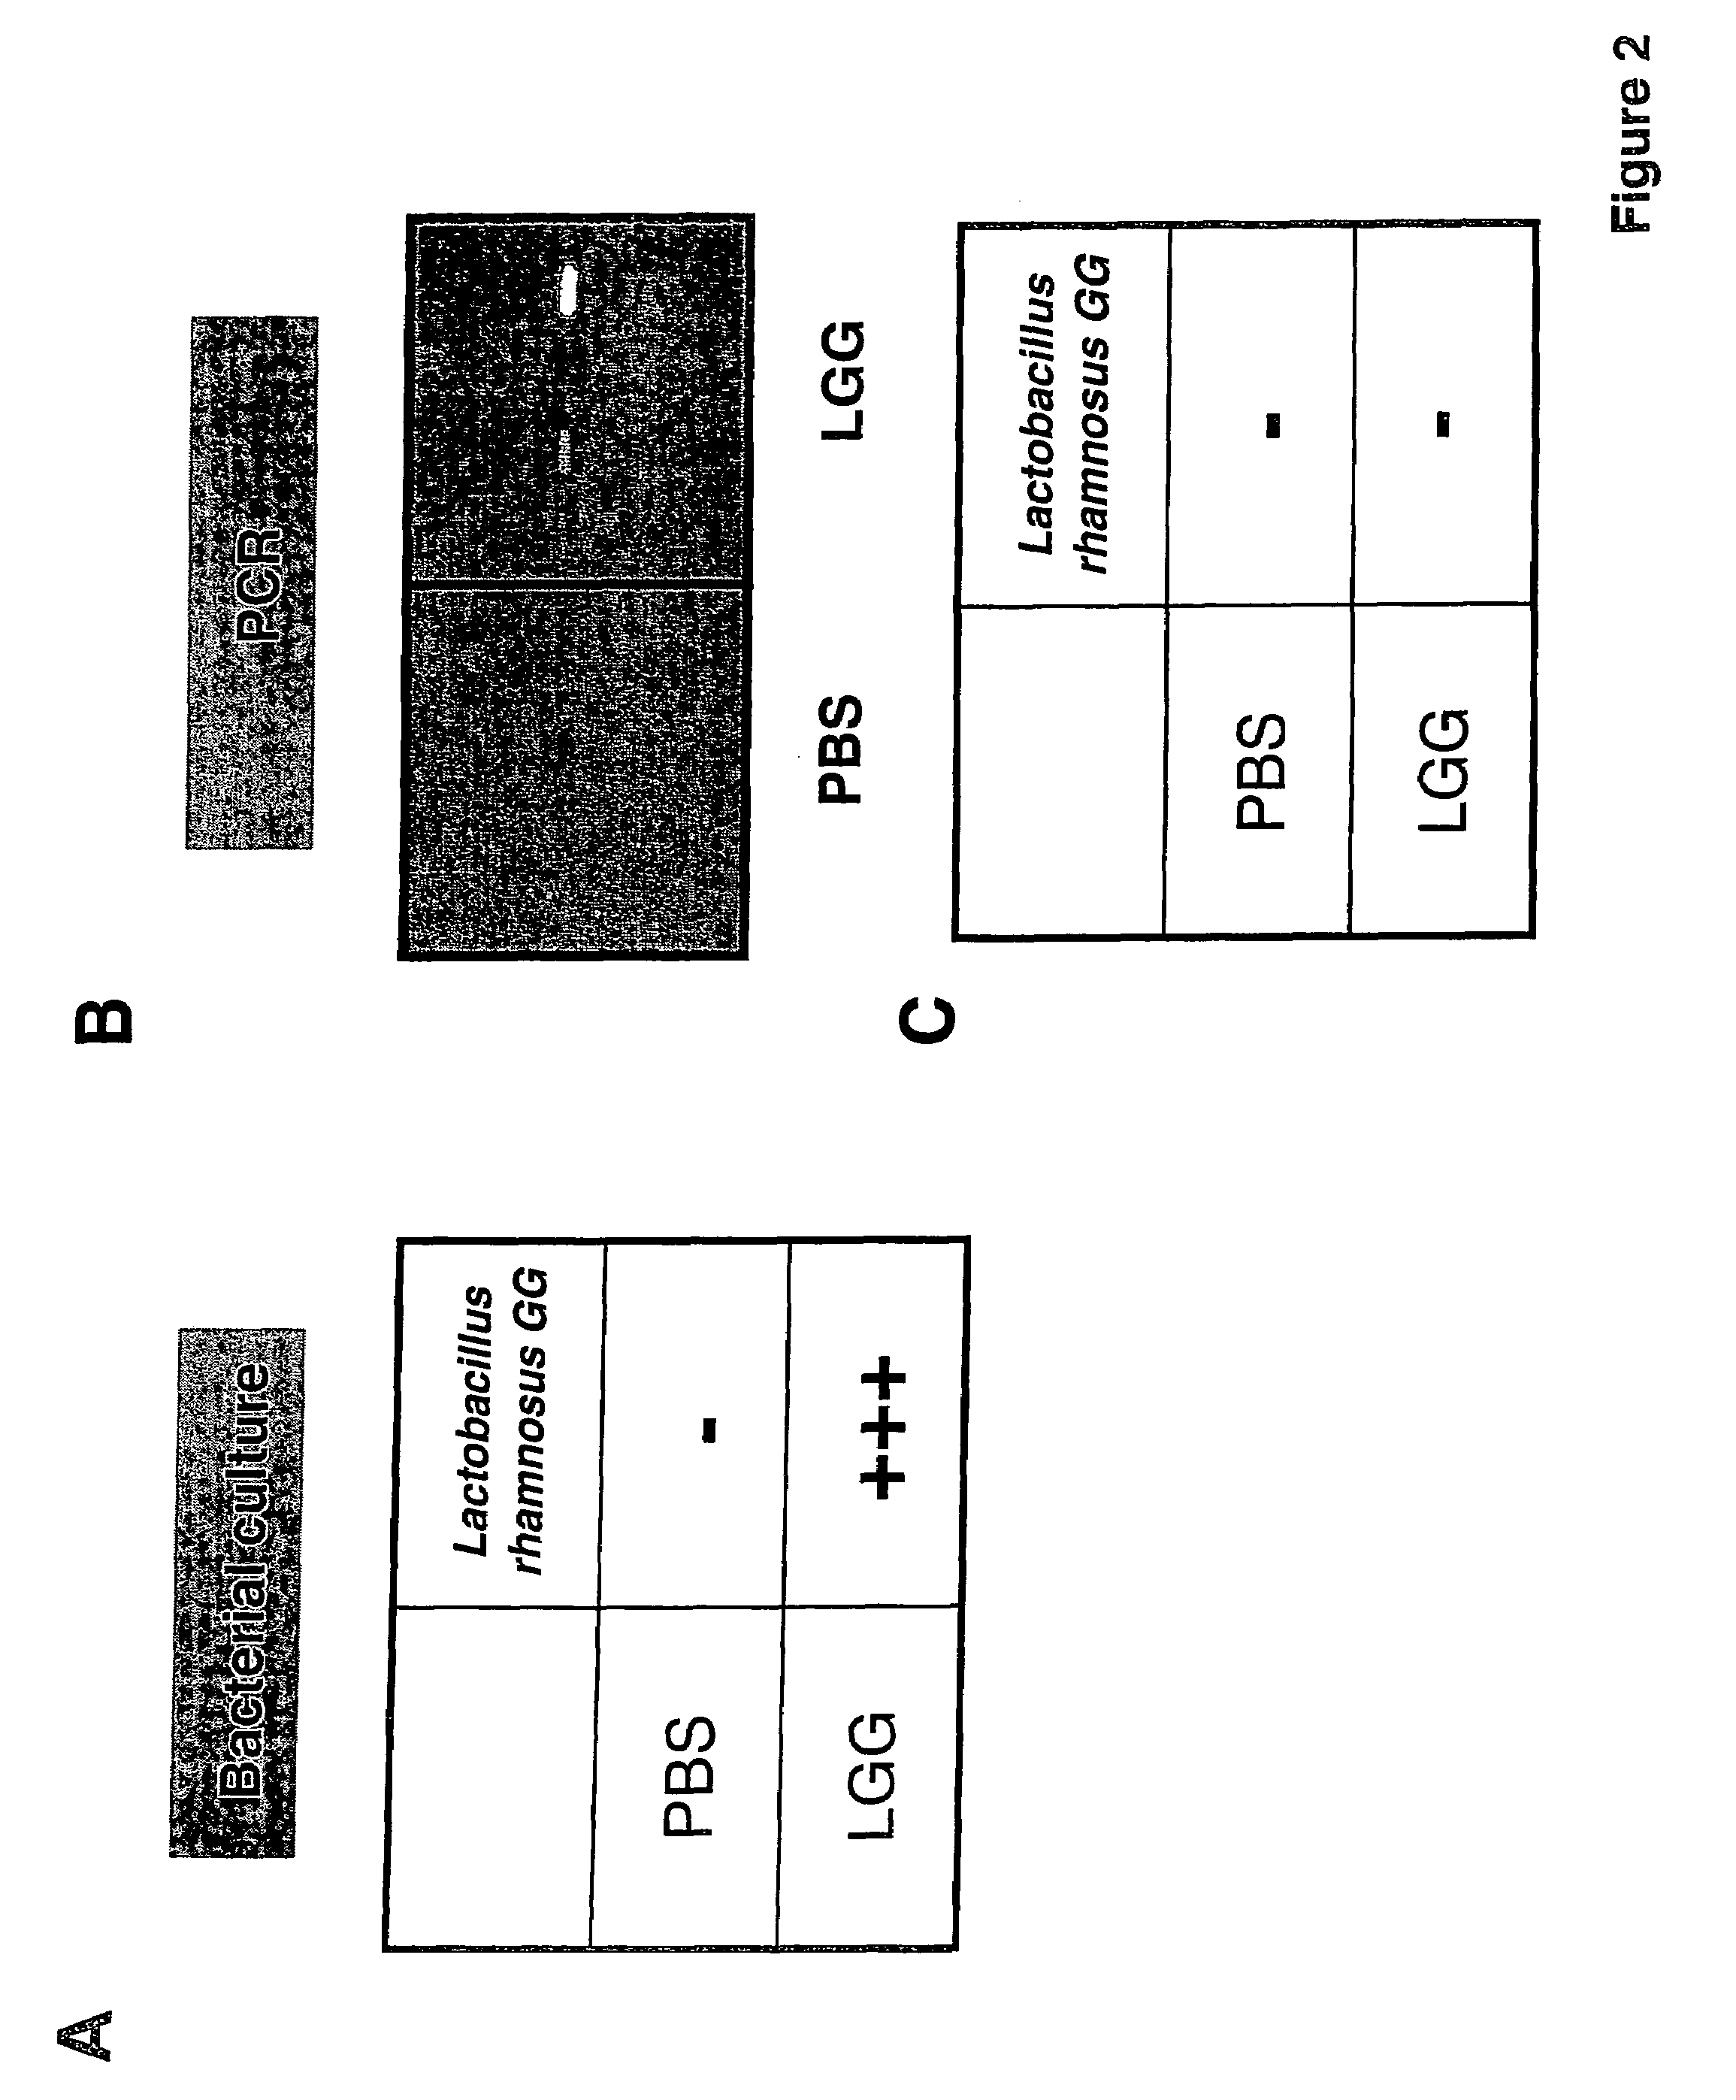 Method for preventing or treating the development of respiratory allergies